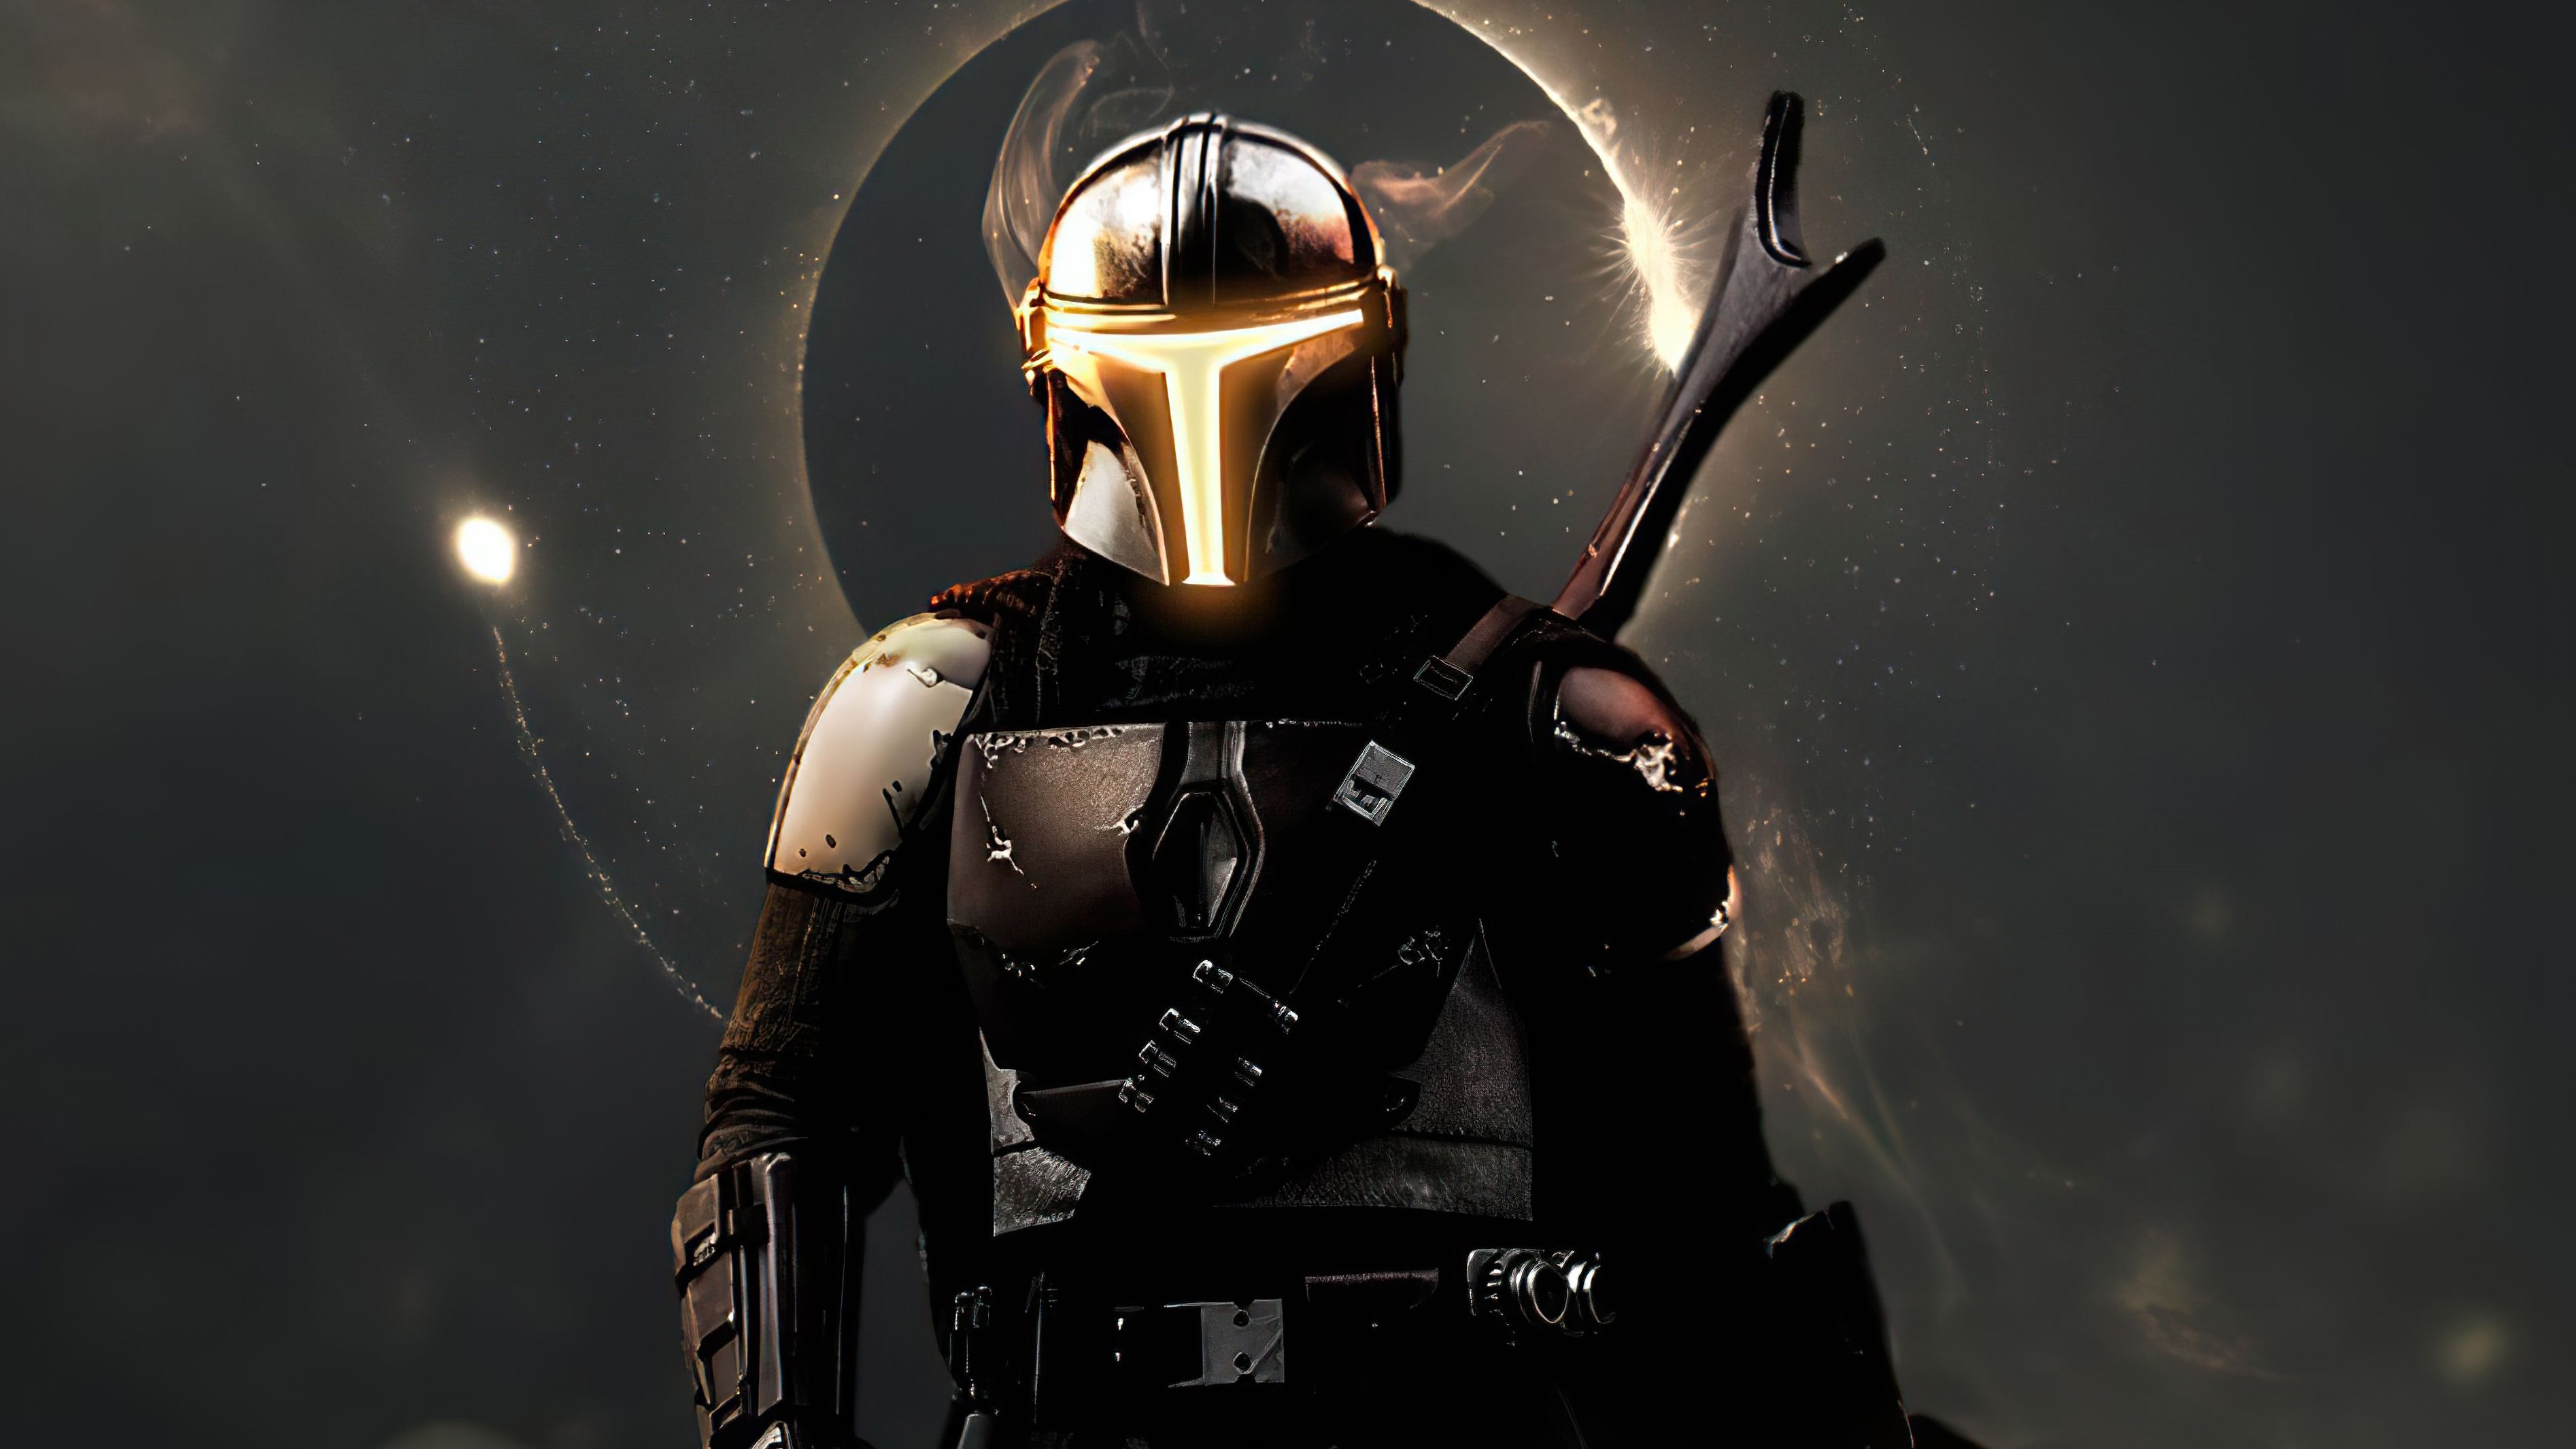 The Mandalorian Season 2 4k 2021, HD Tv Shows, 4k Wallpapers, Image, Backgrounds, Photos and Pictures